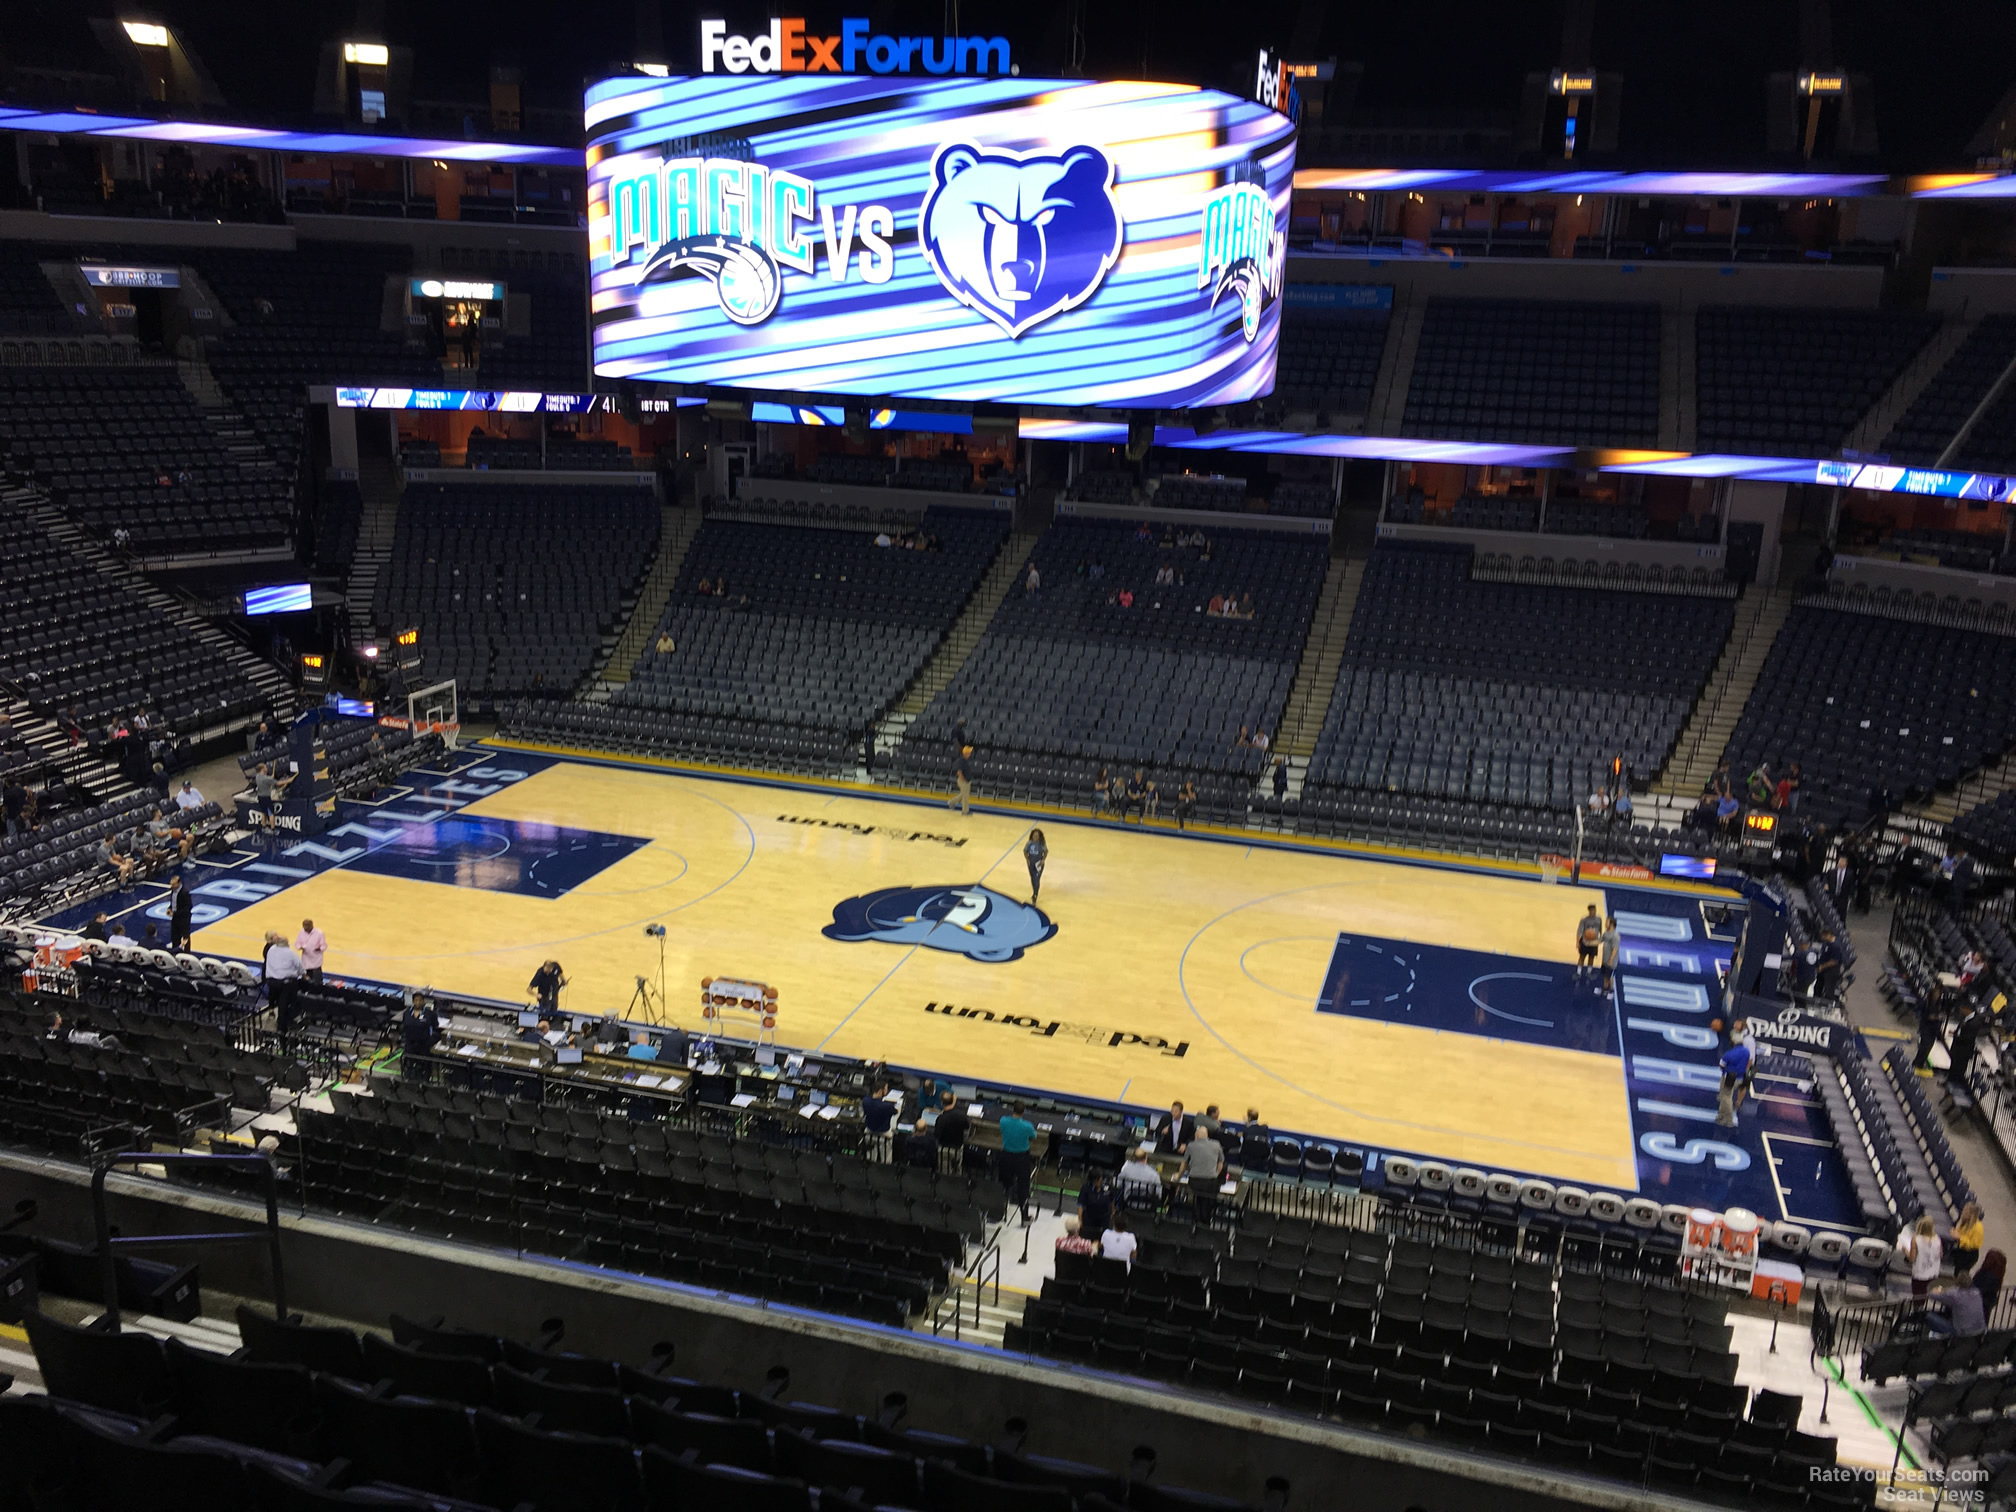 section p5, row h seat view  for basketball - fedex forum